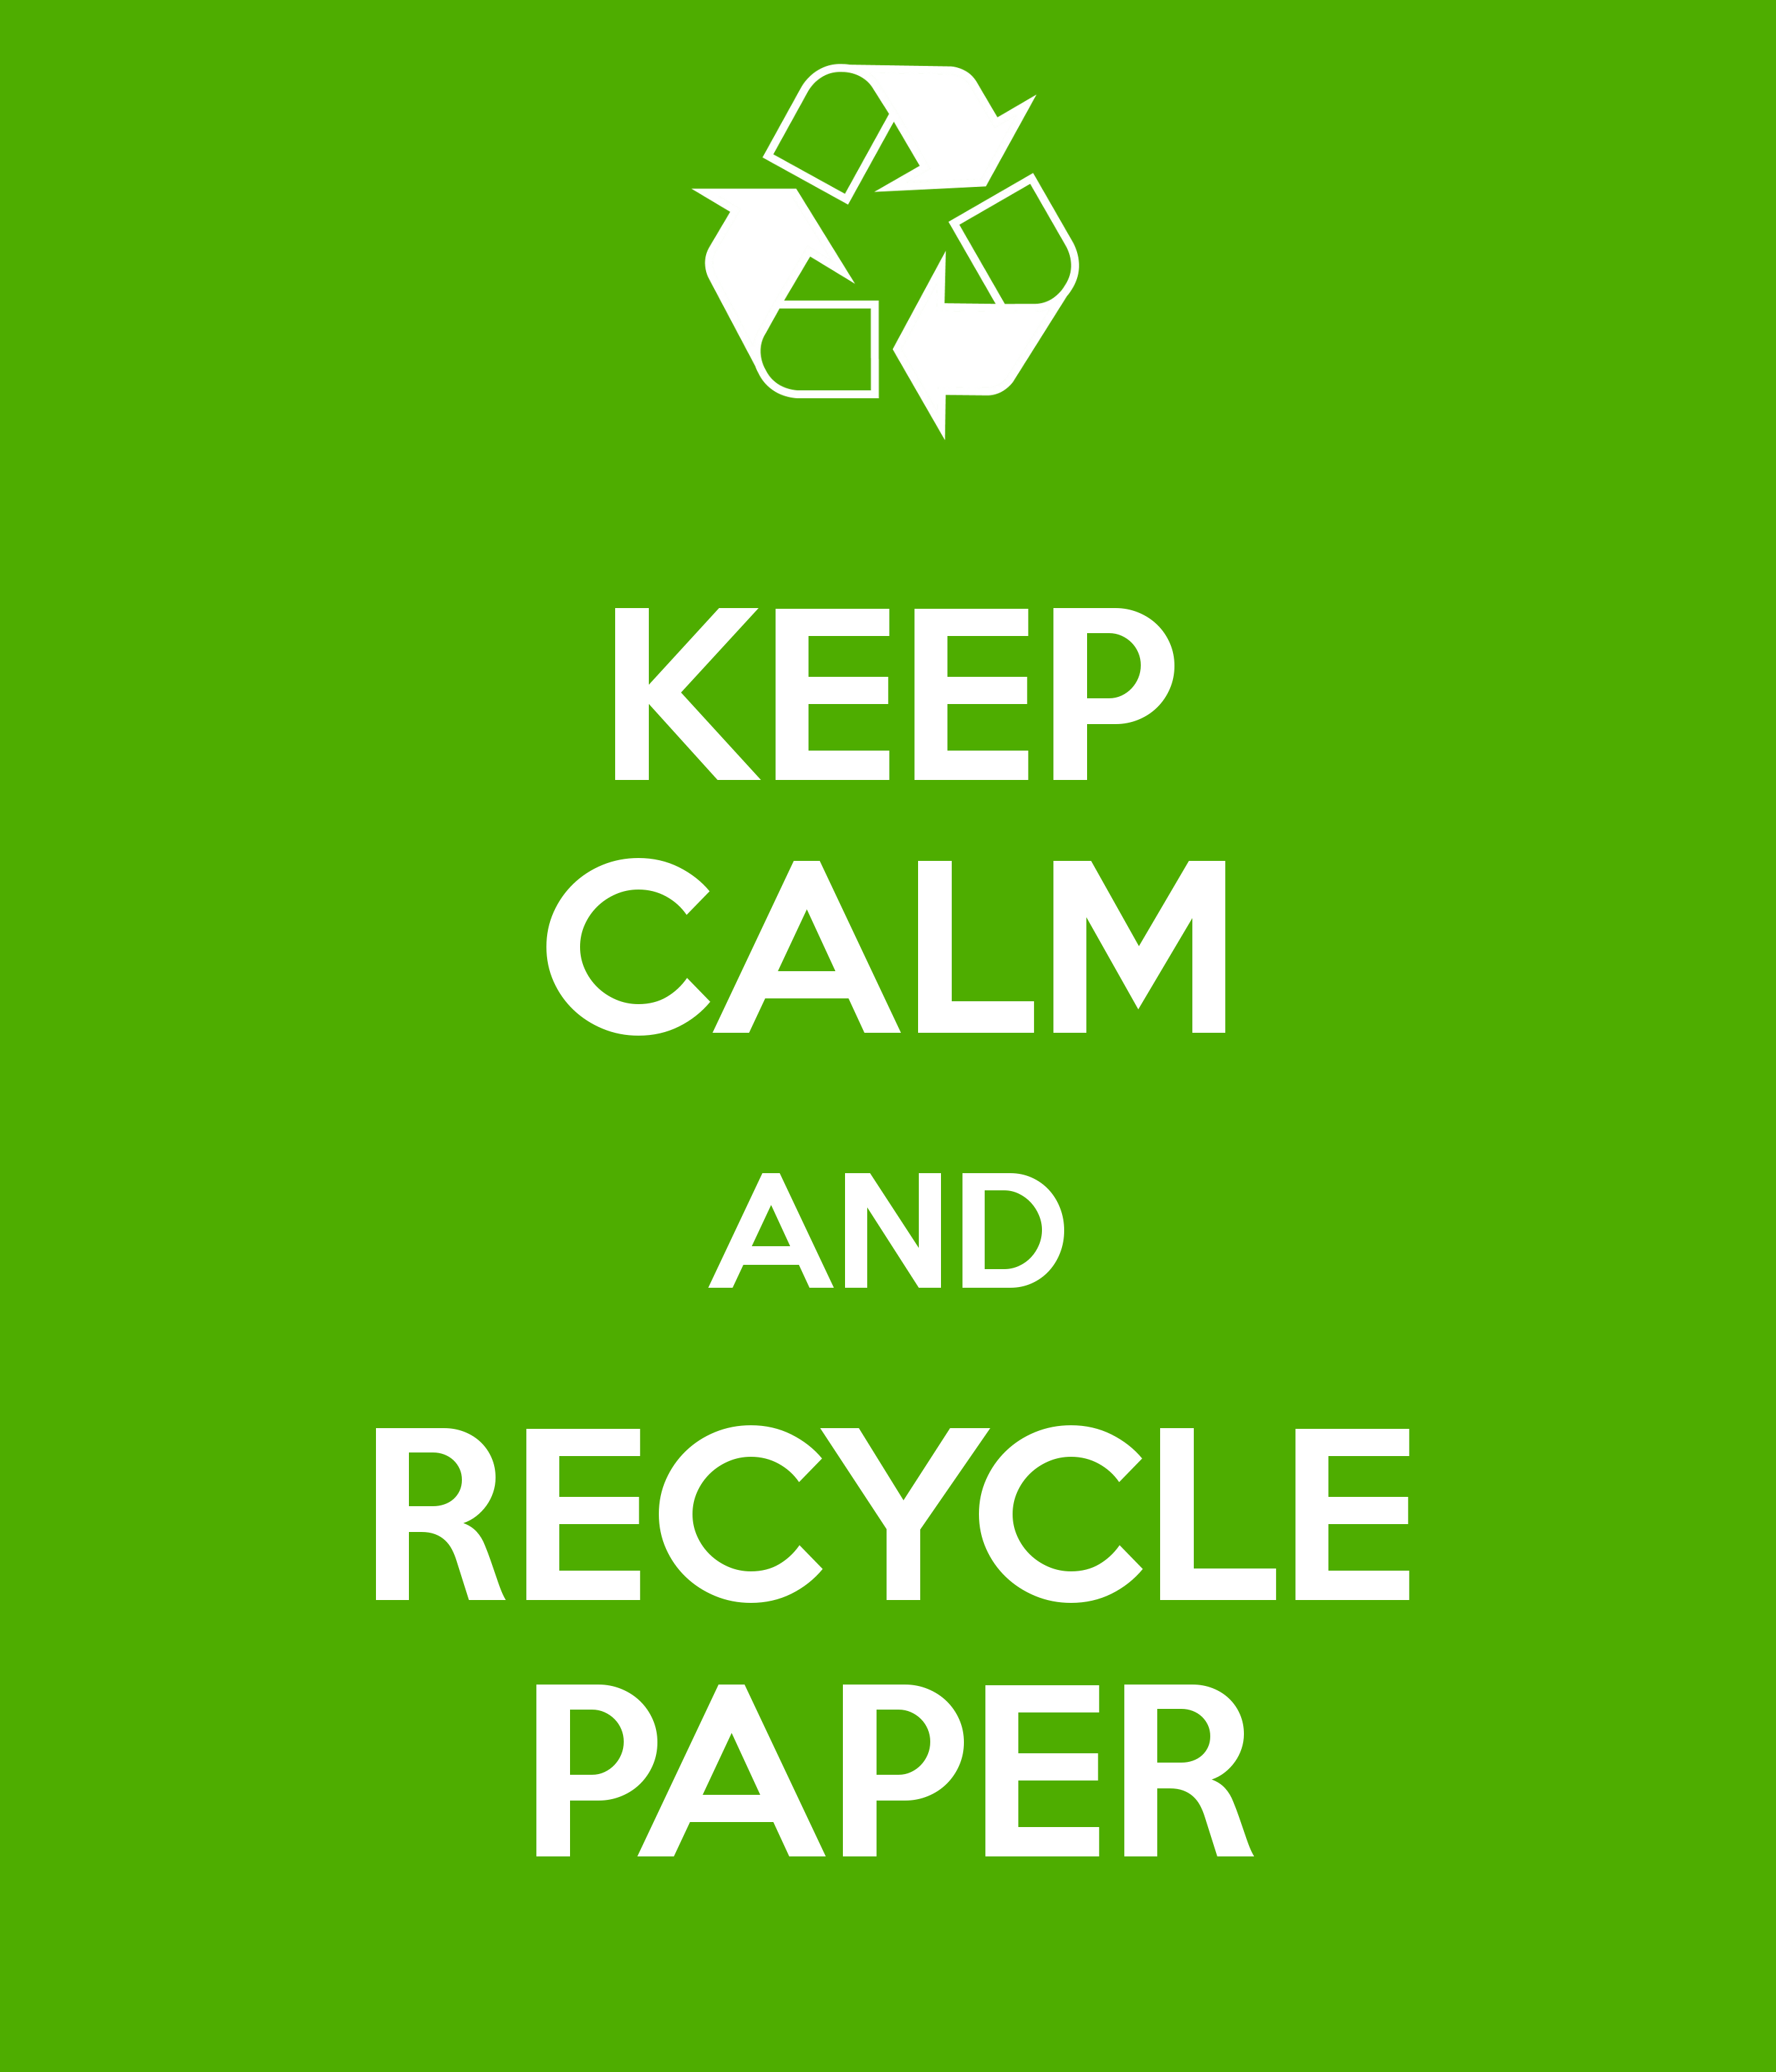 Recycle Paper Keep Calm And Recycle Paper